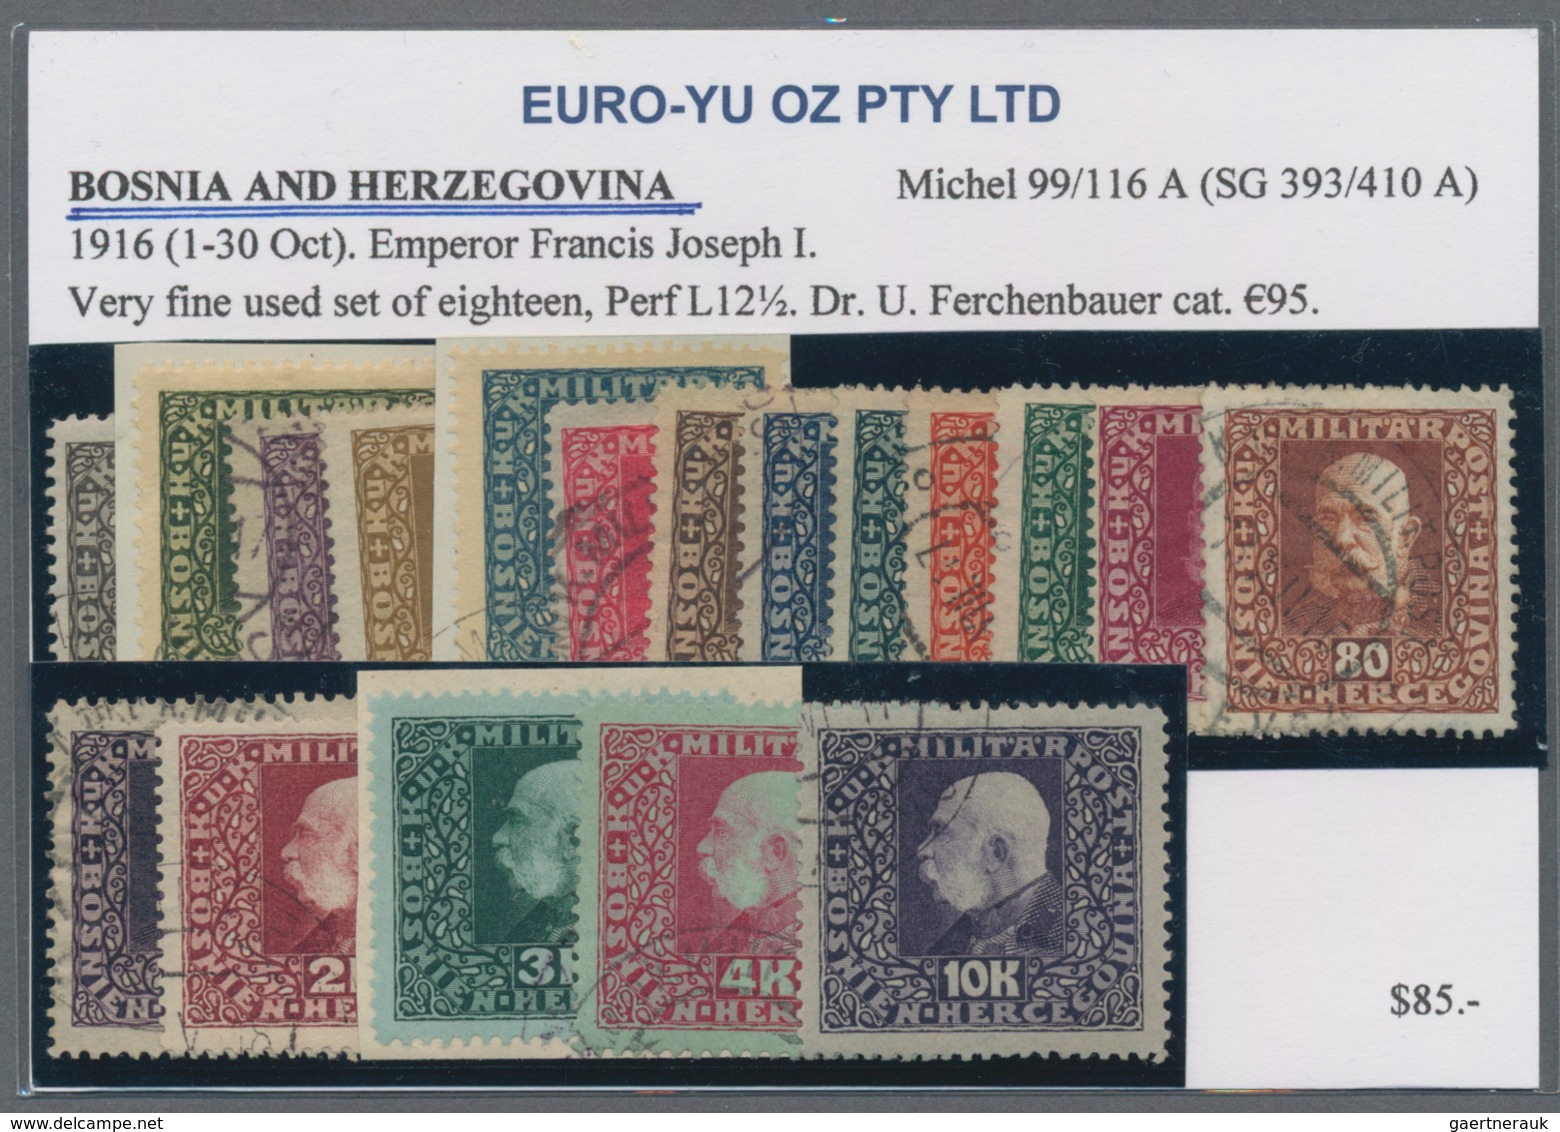 Bosnien und Herzegowina: 1912/1918, Various issues, specialised assortment of apprx. 183 stamps, com